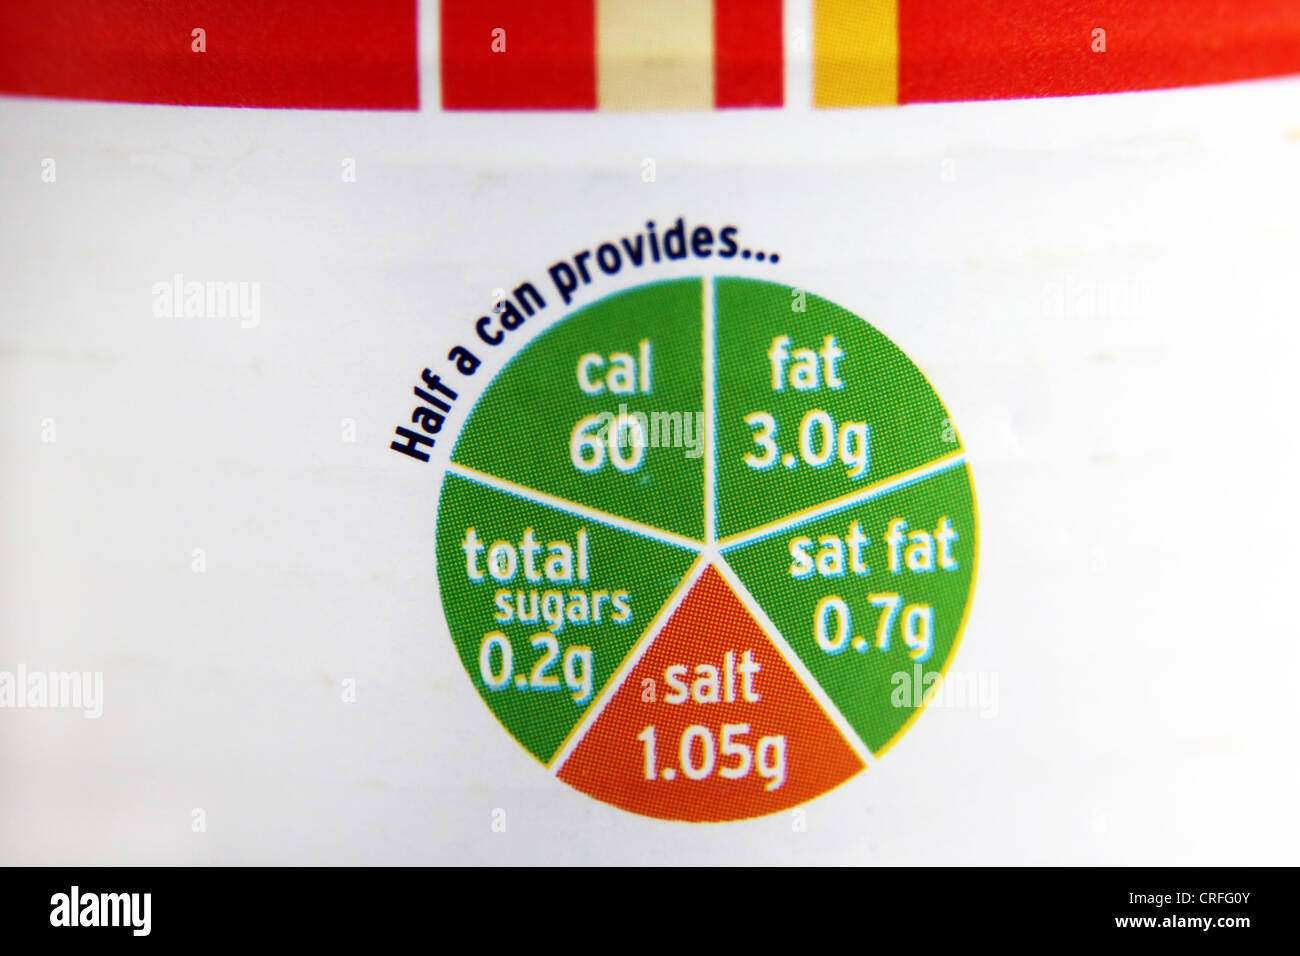 Tin Of Food Showing Calories, Fat, Saturated Fat, Sugars And Salt In A Traffic Light System Stock Photo